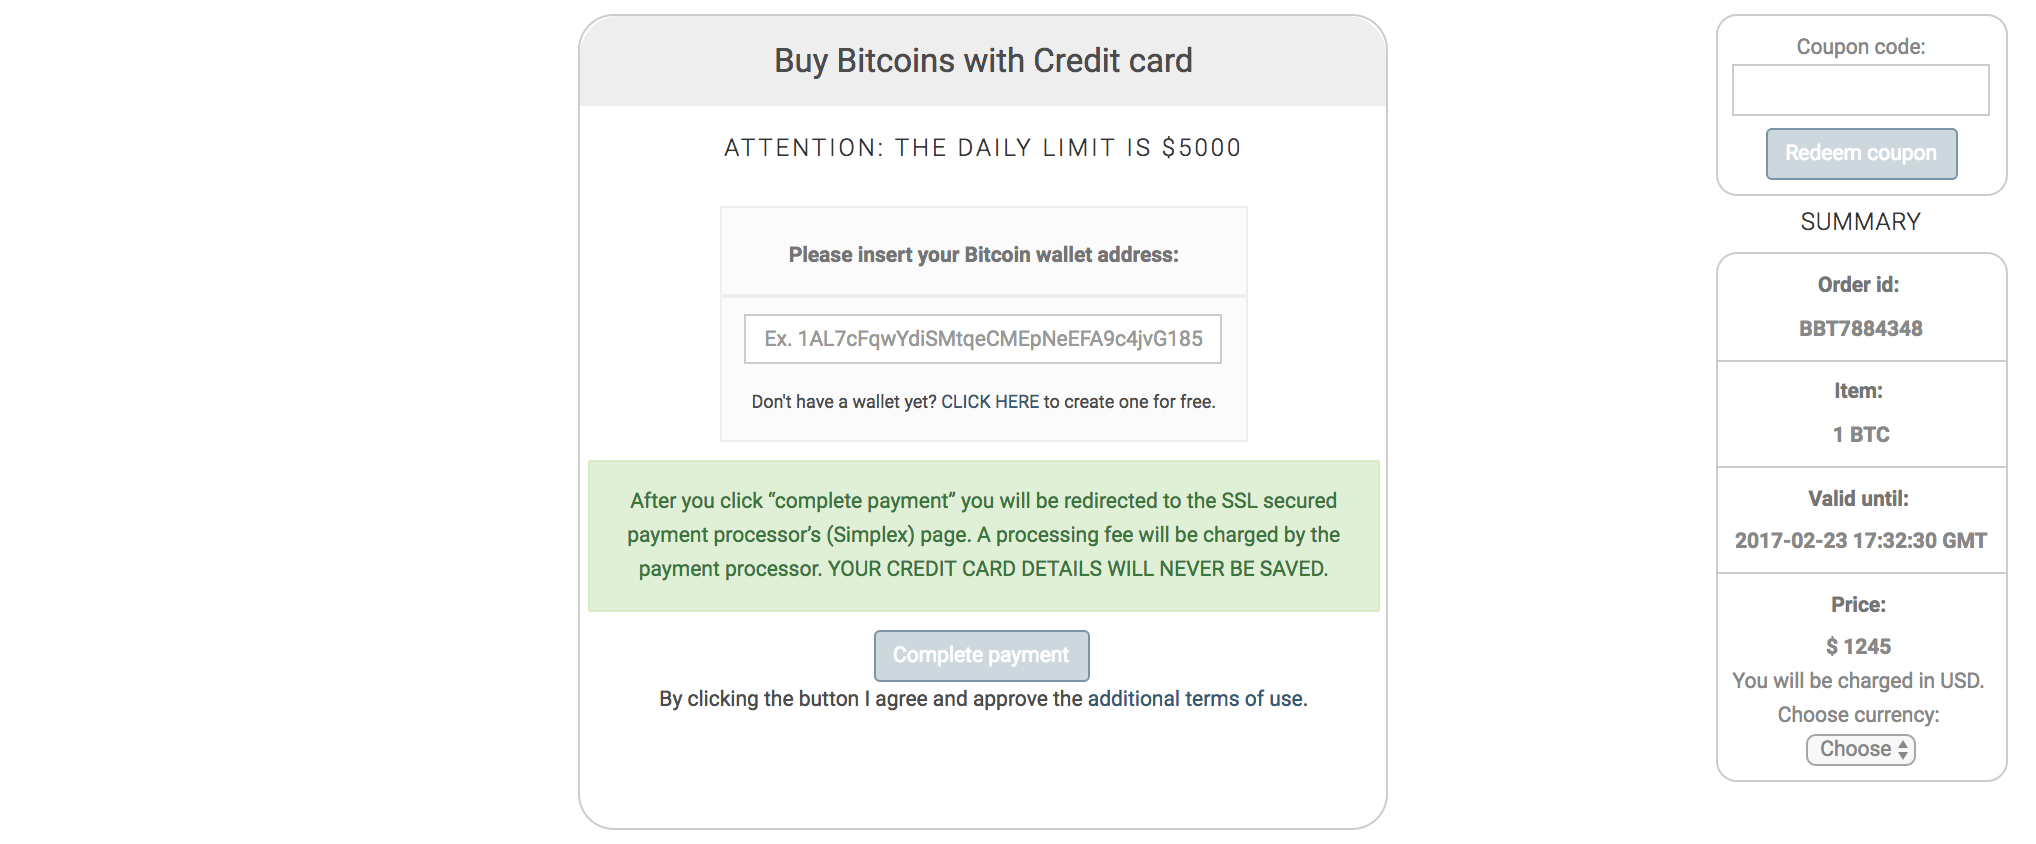 How to use bitcoin without bank account bch cryptocurrency